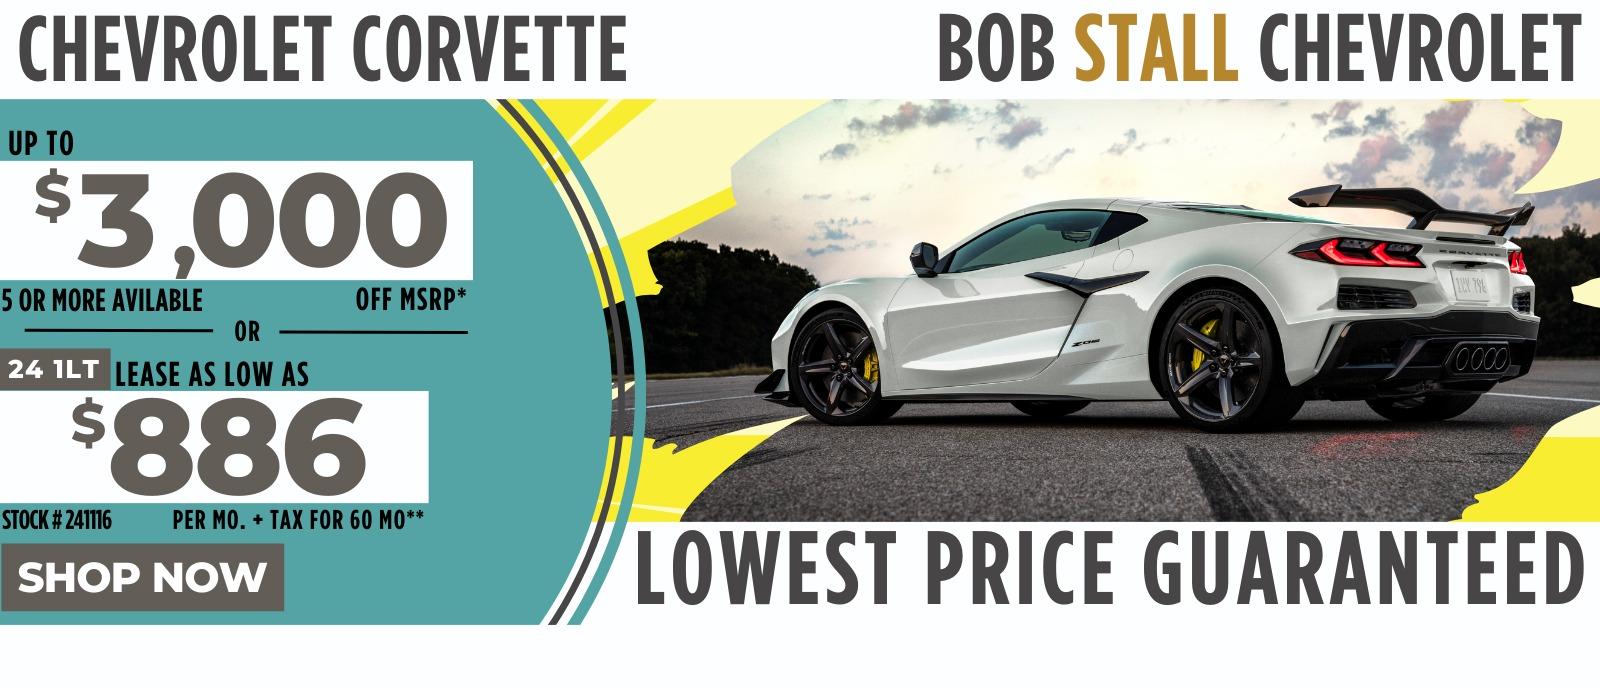 Corvette 2024  Savings - Up to $3,000 off MSRP or Lease as Low as $886 per month